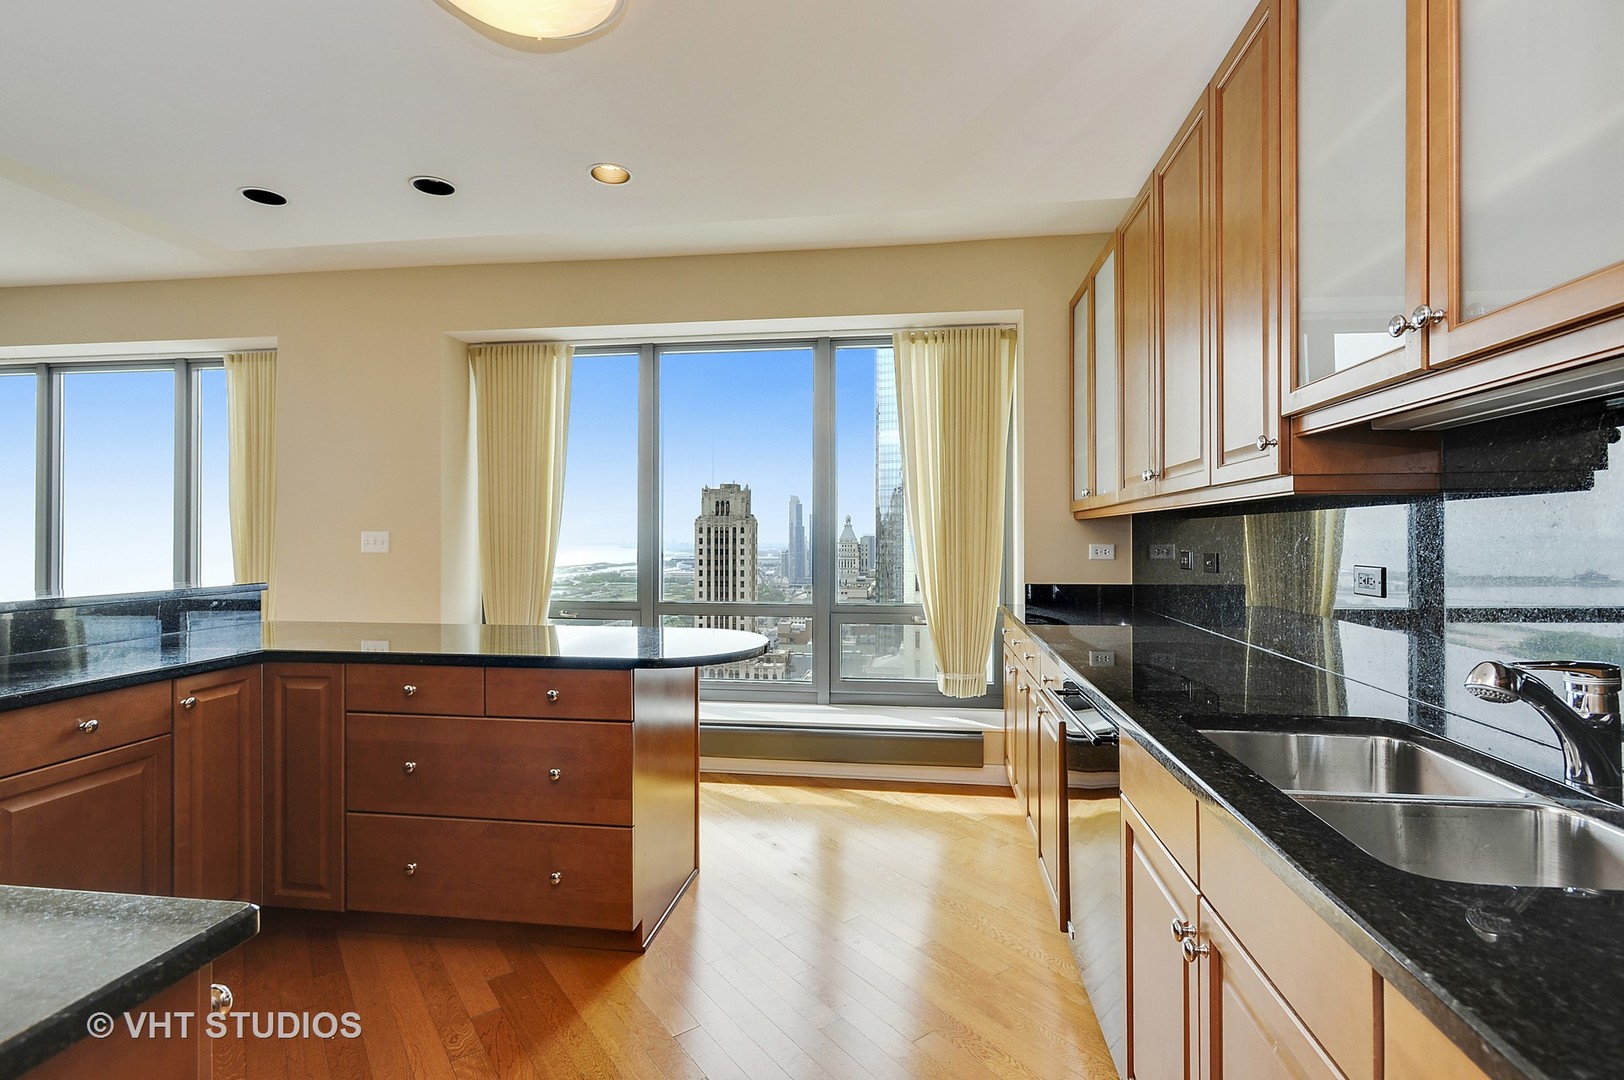 130 N Garland Ct Unit 3705, Chicago, IL 60602 Home for Sale